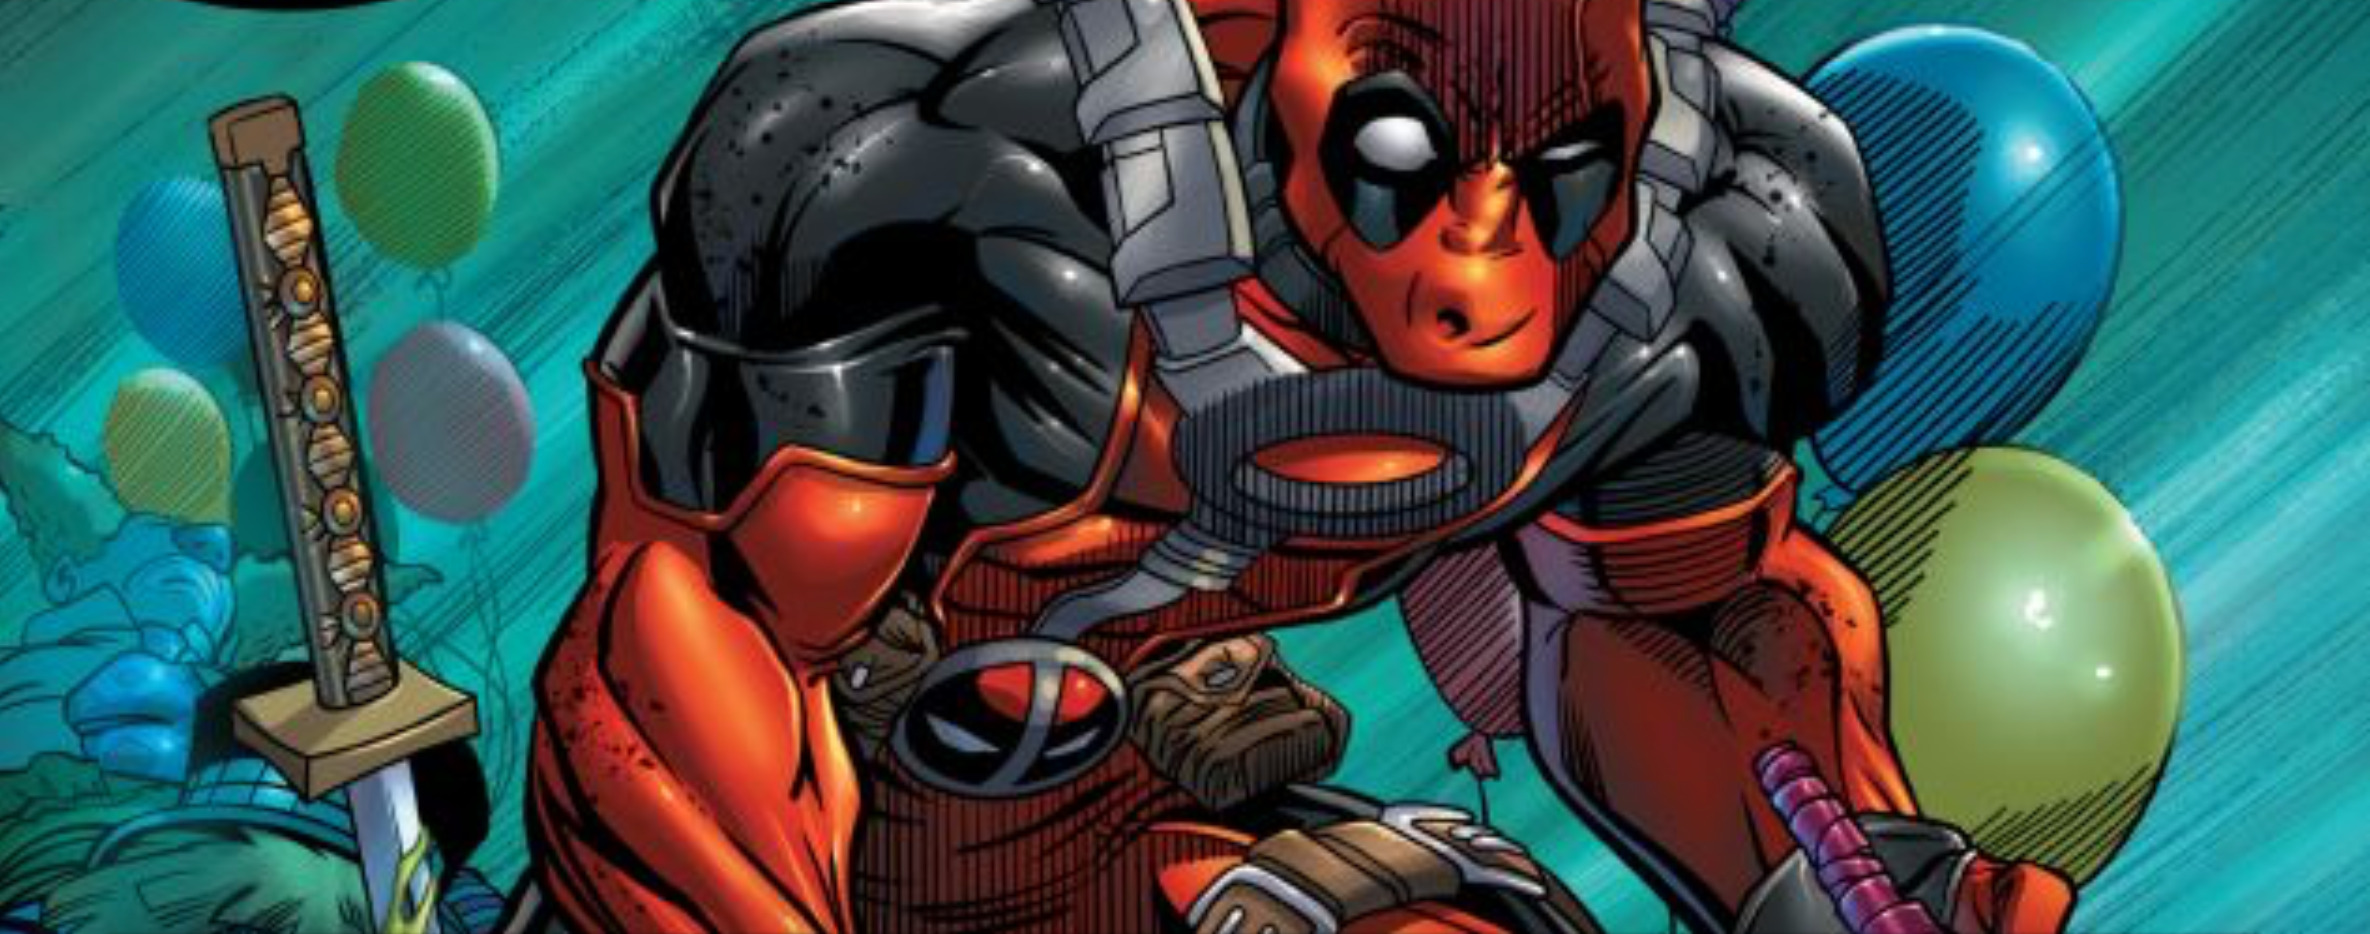 Cable Deadpool Enema of the State